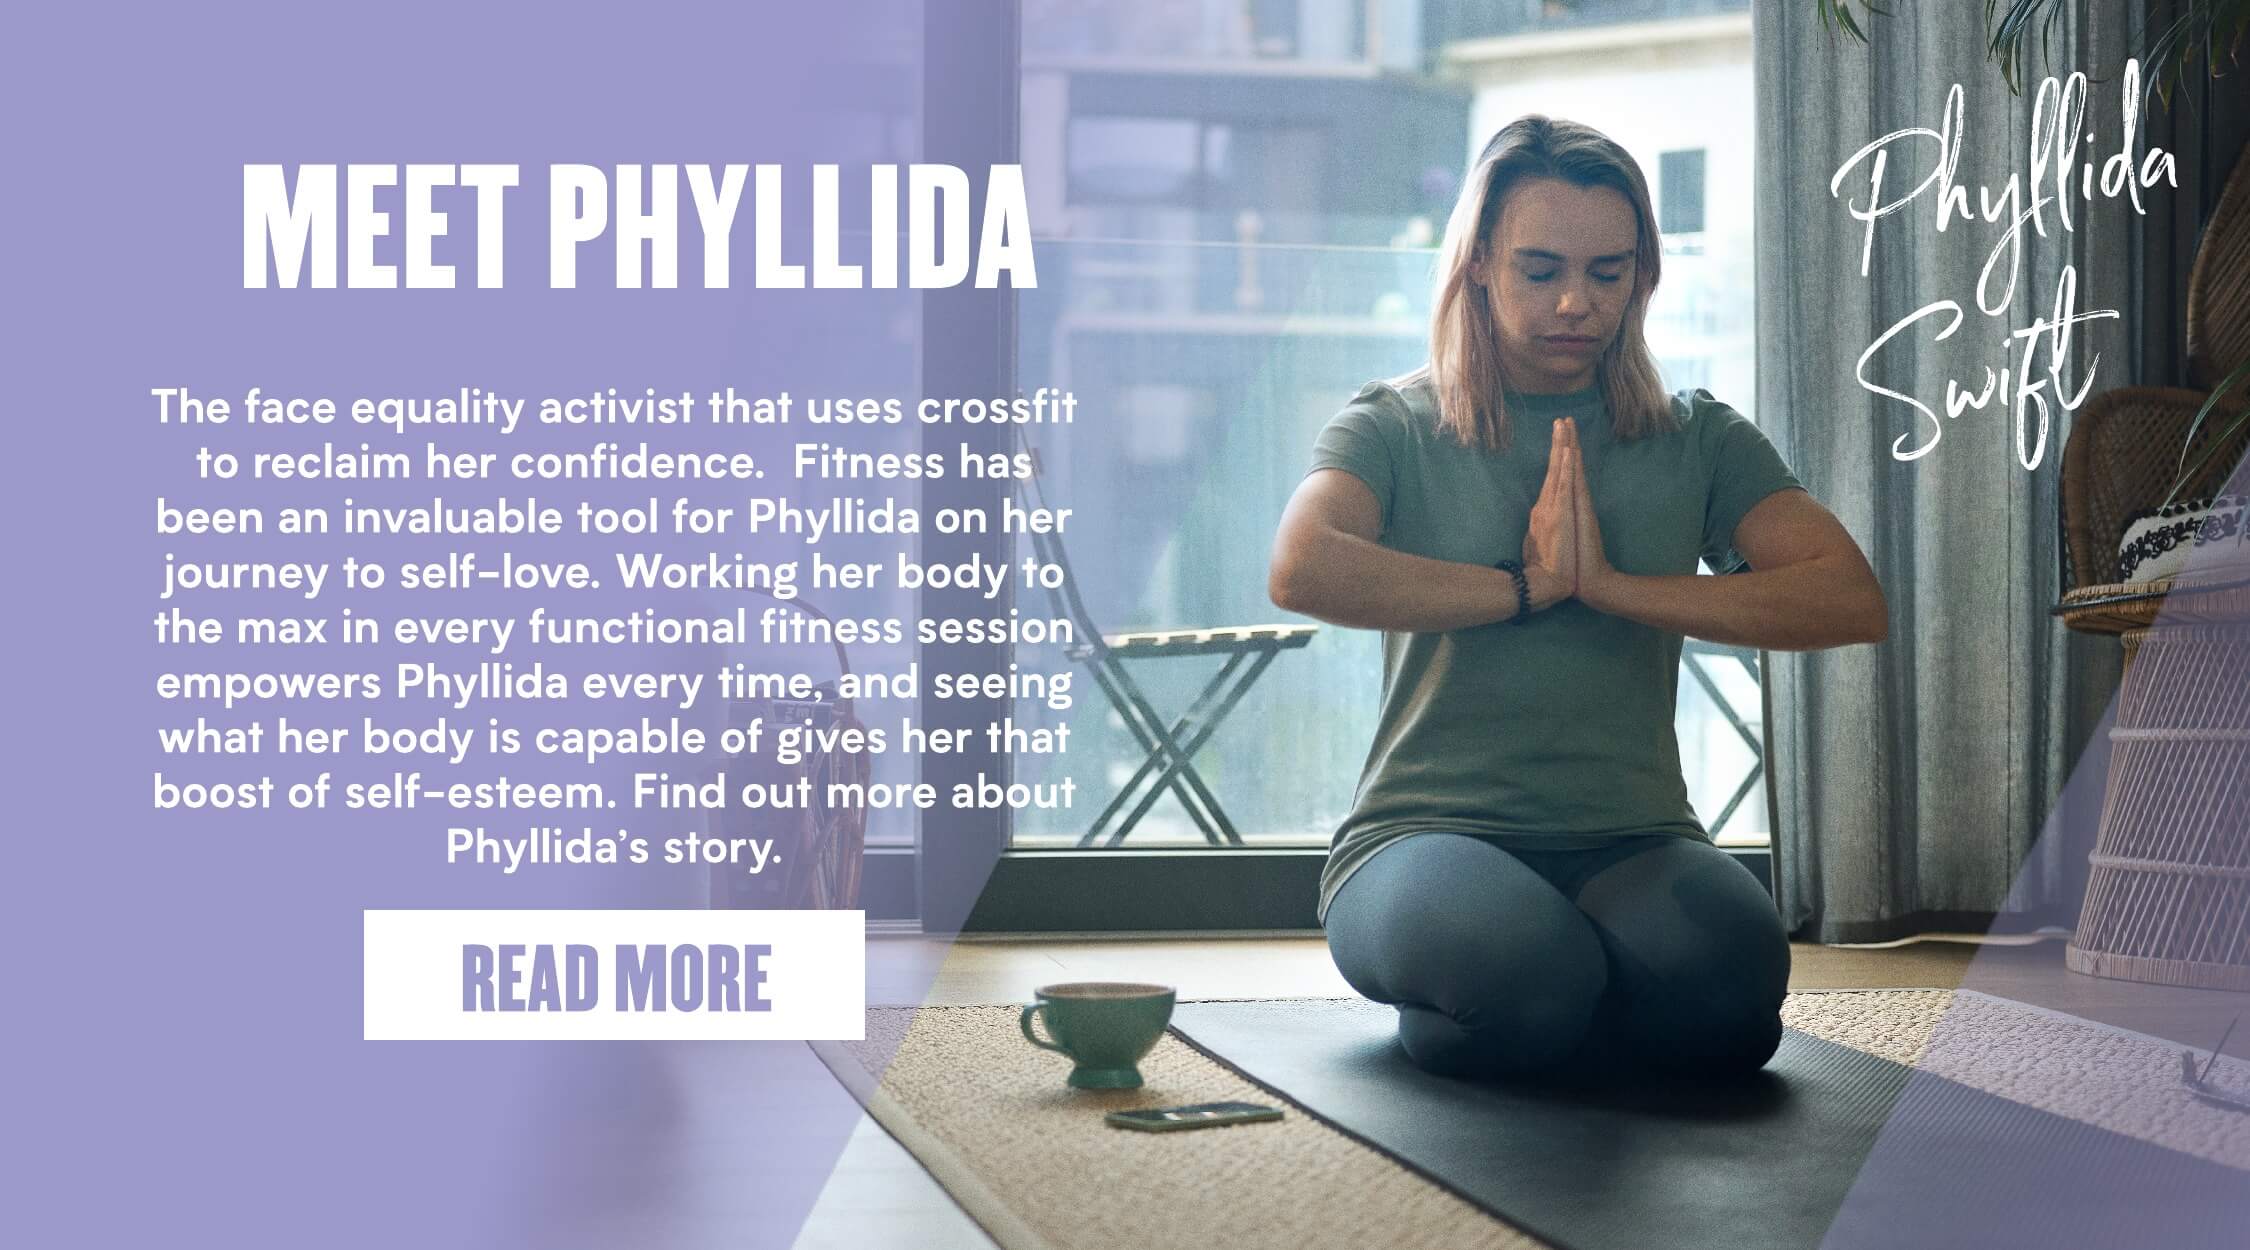 https://www.myprotein.com/thezone/our-ambassadors/meet-phyllida-activist-by-night-050721/